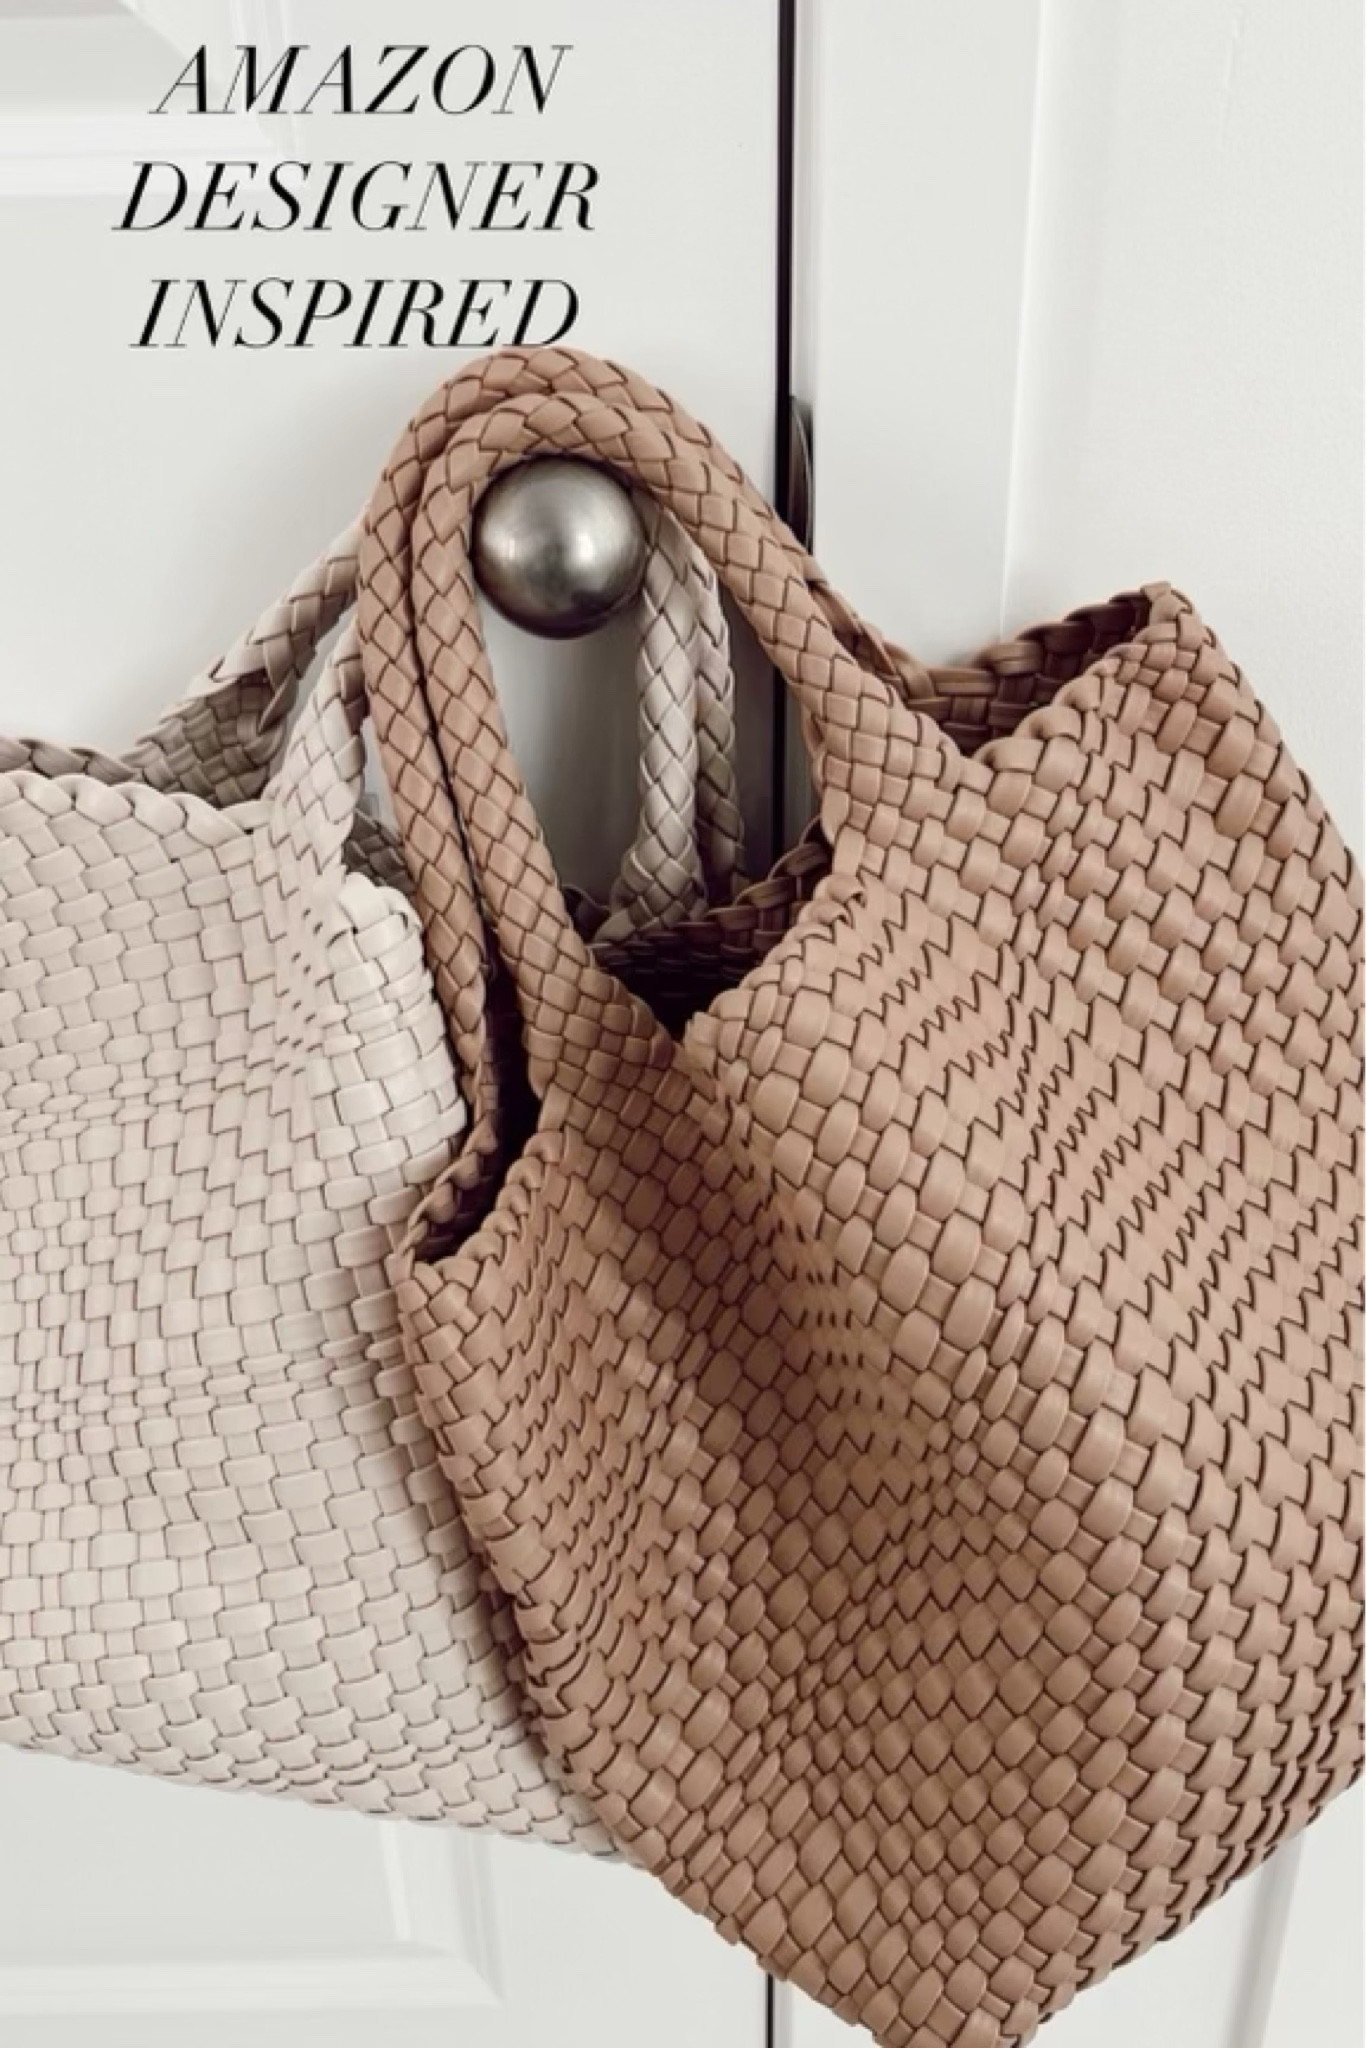 Brown Woven Tote with Strap – Bag & Bougie